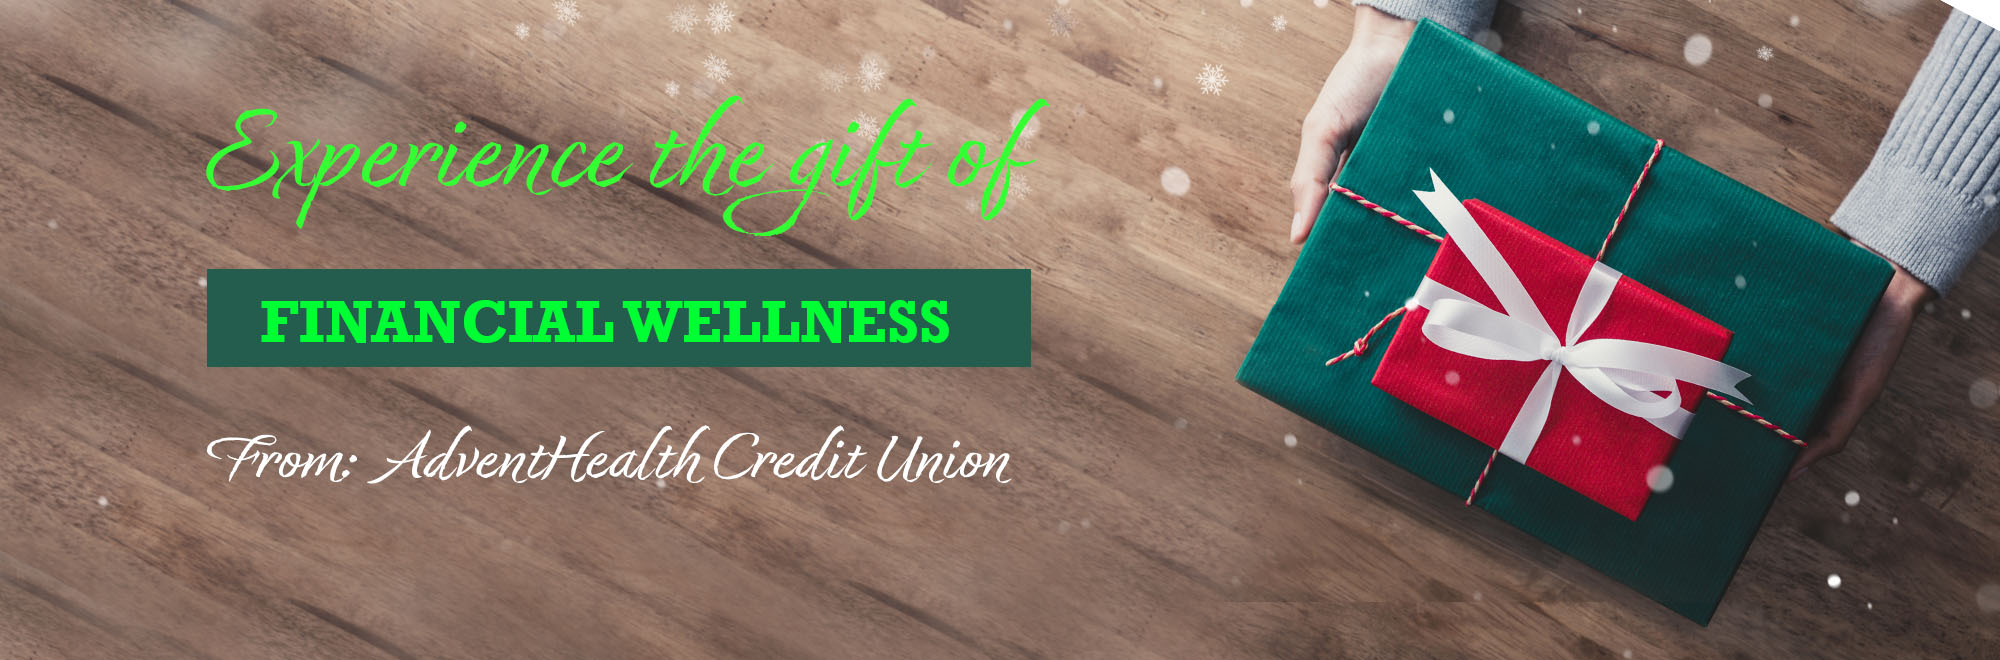 Experience the gift of financial wellness from Adventhealth Credit Union